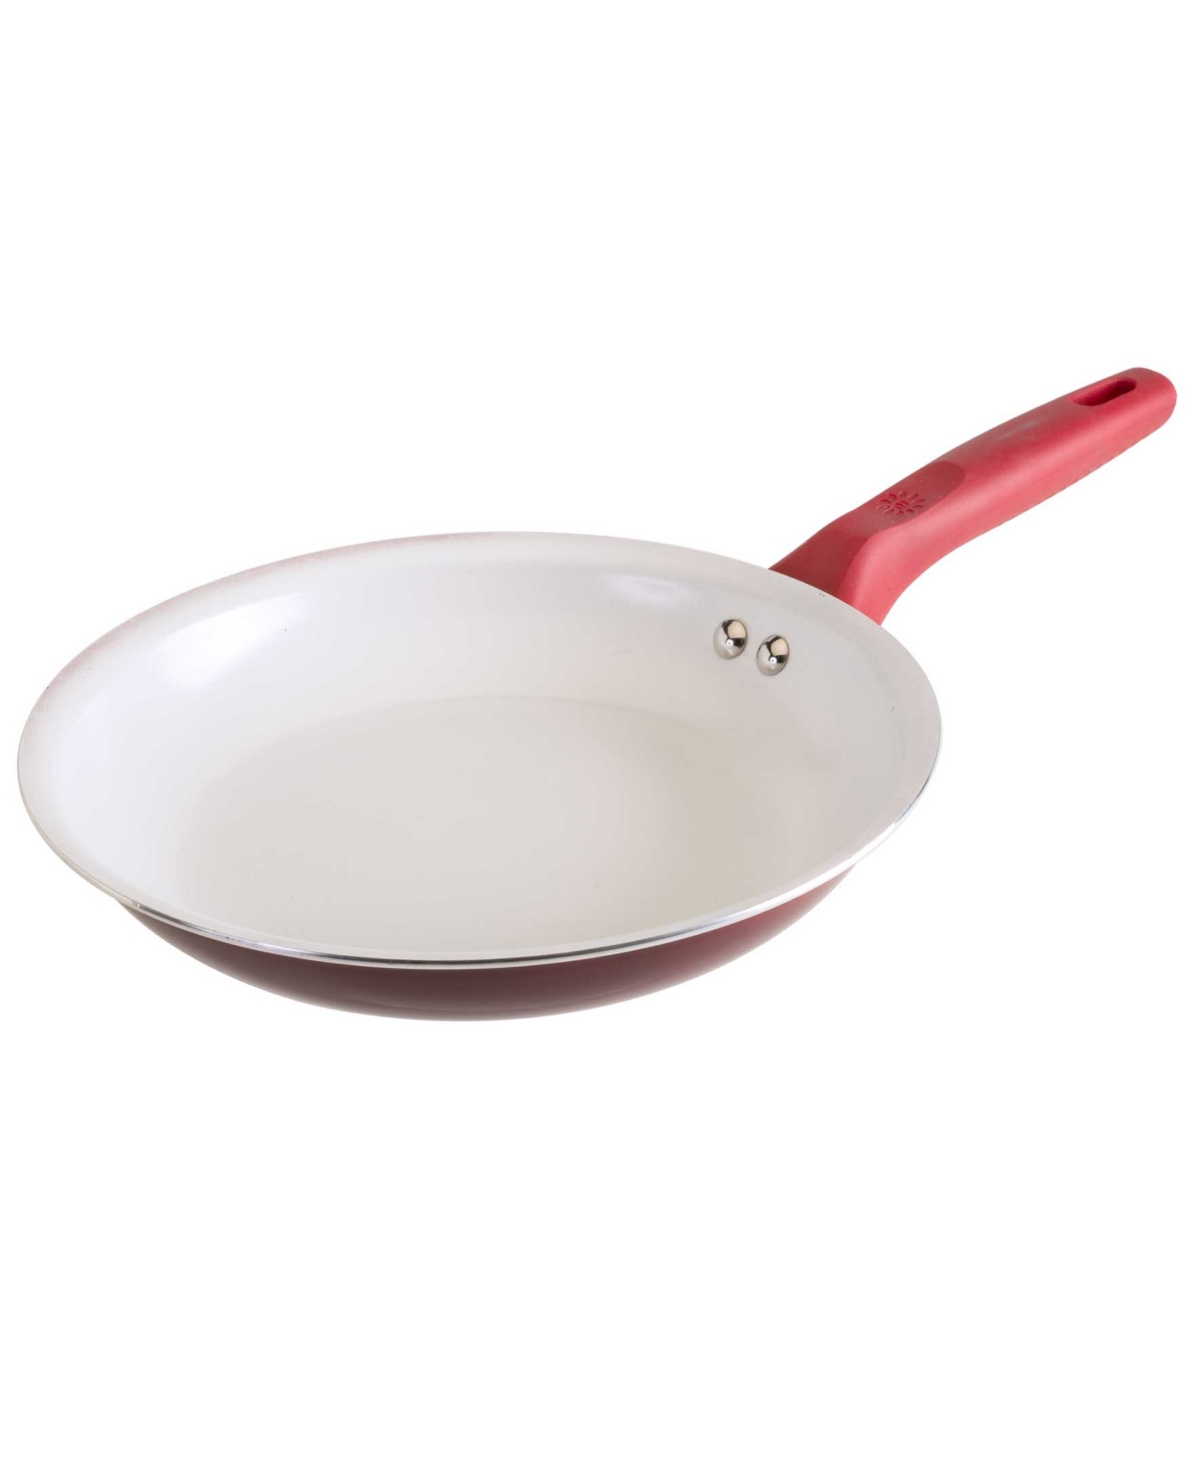 Ecolution Aluminum 9.5" Bliss Non-stick Fry Pan In Red